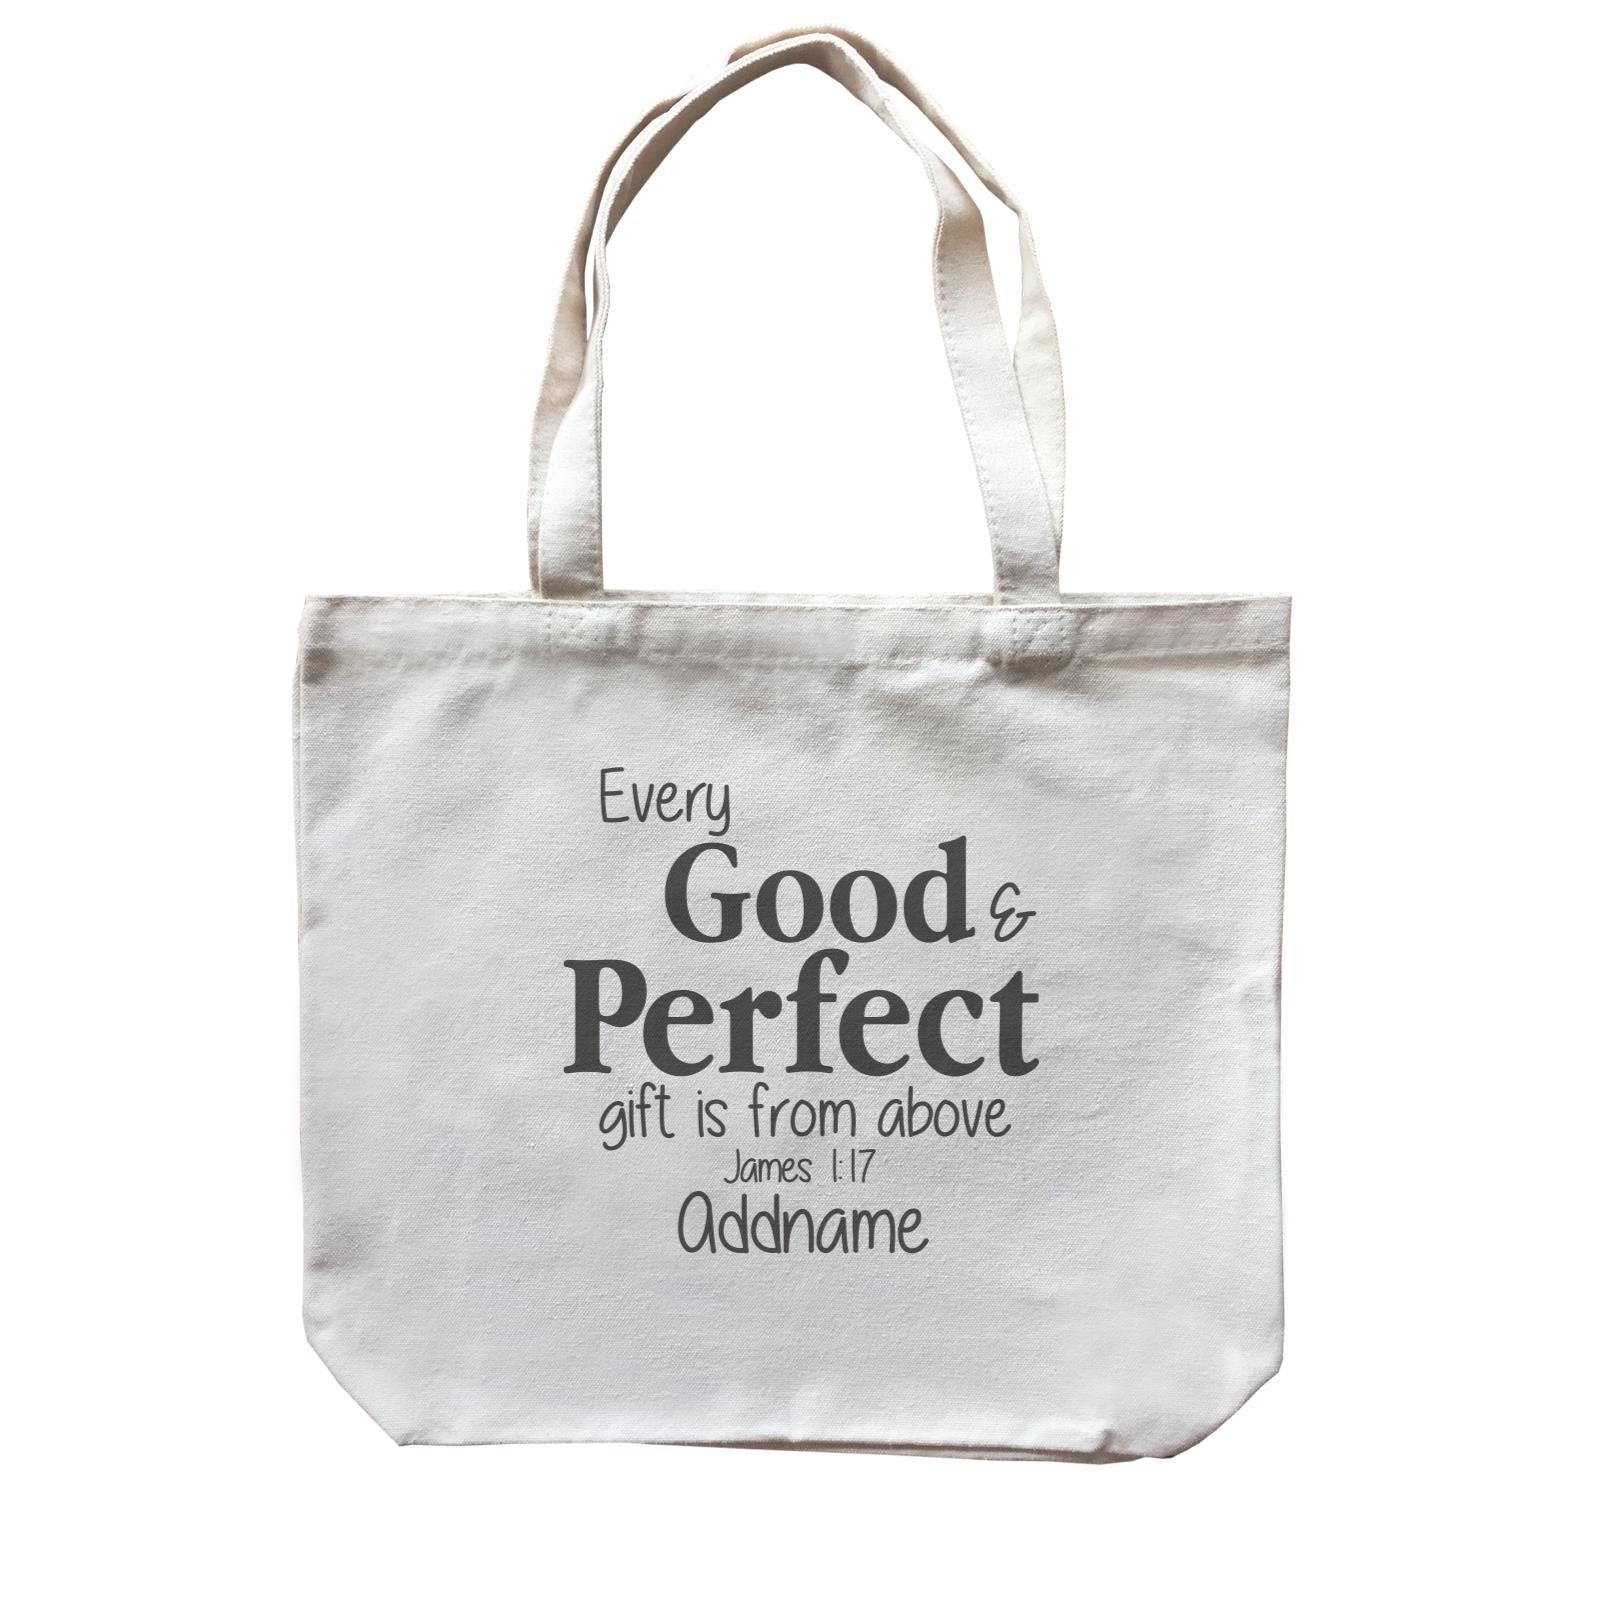 Christ Newborn Every Good and Perfect Gift is from Above James 1.17 Addname Canvas Bag